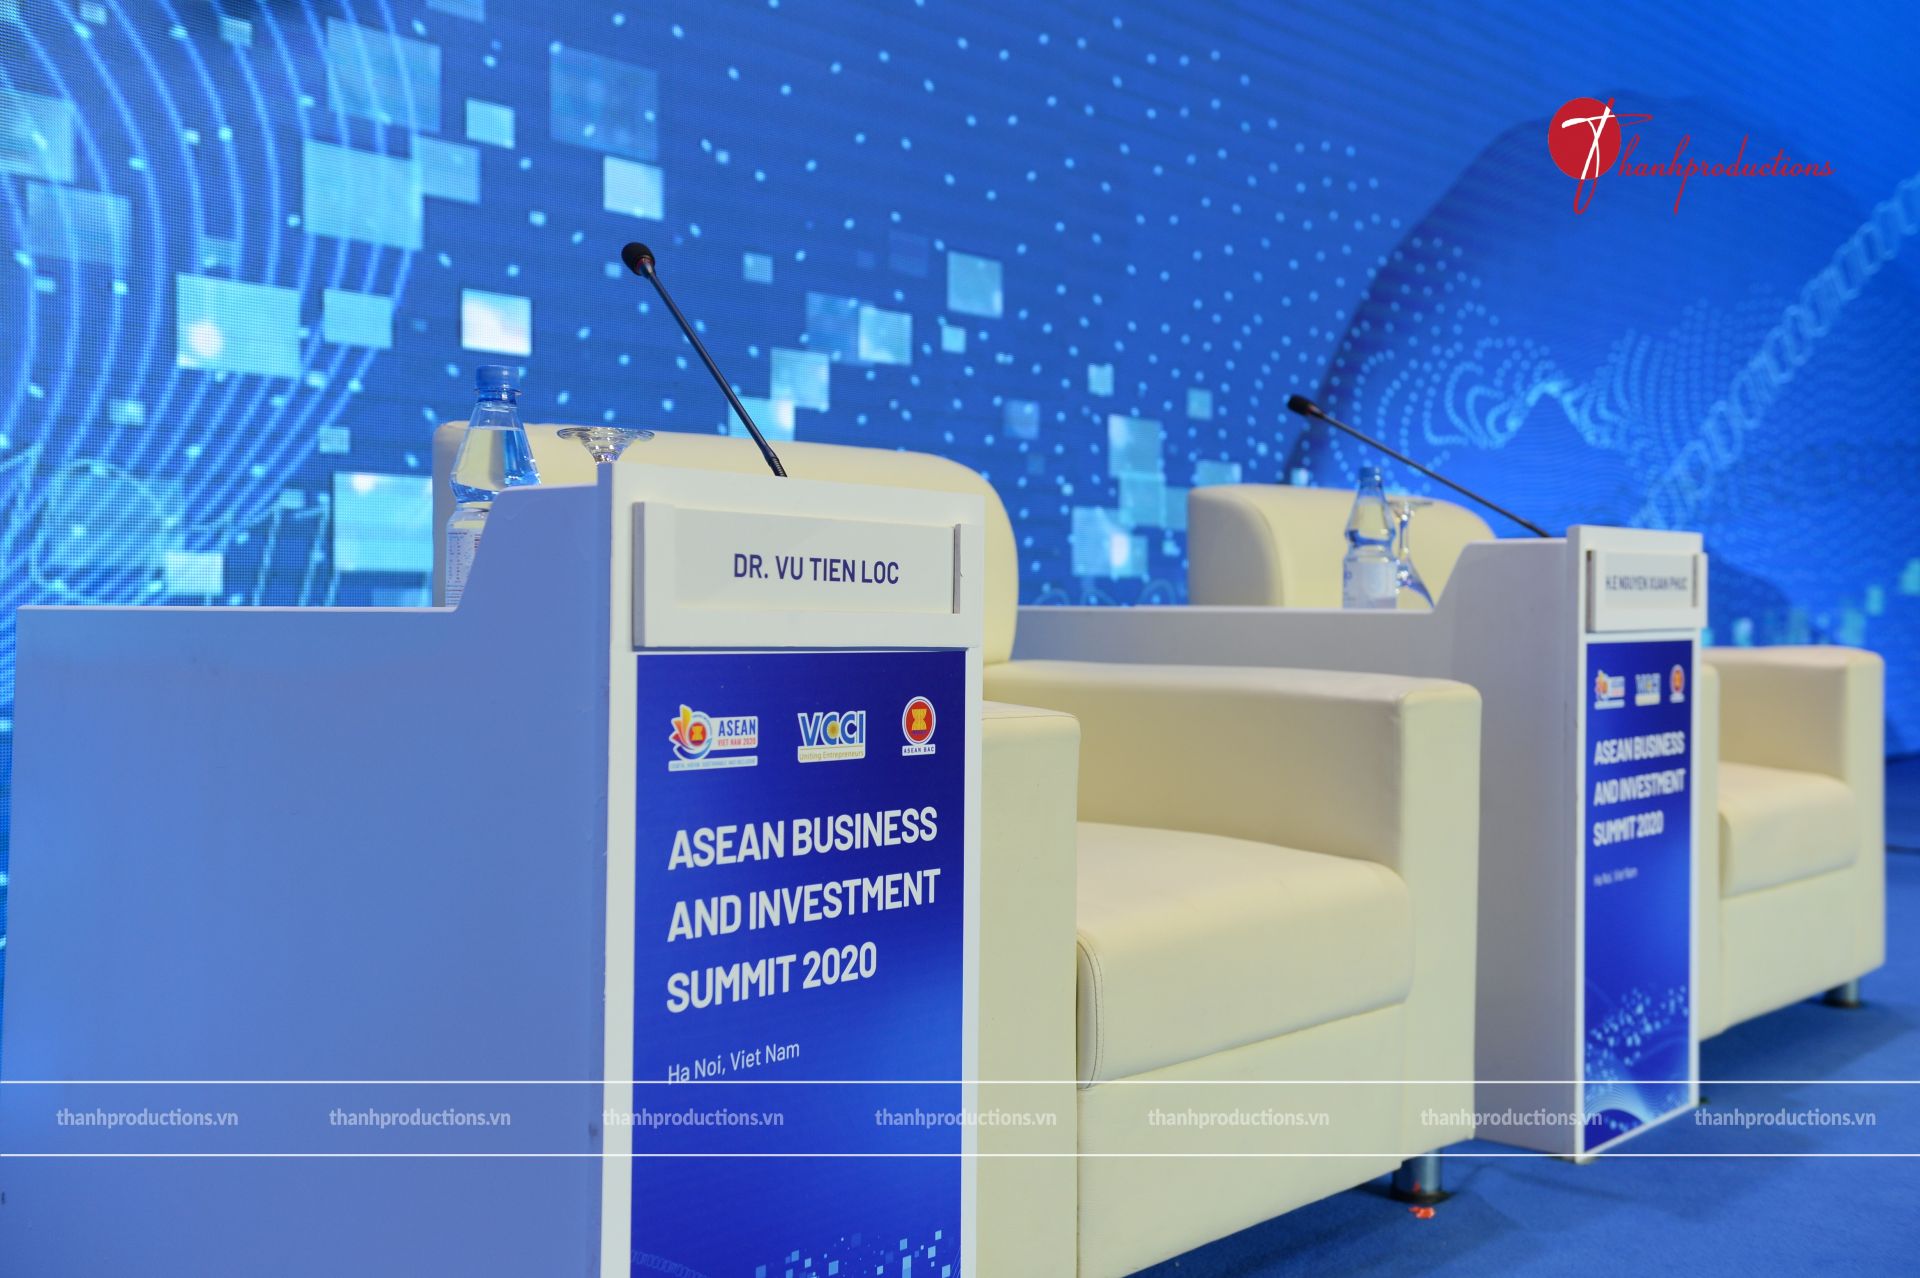 ASEAN BUSINESS AND INVESTMENT SUMMIT 2020